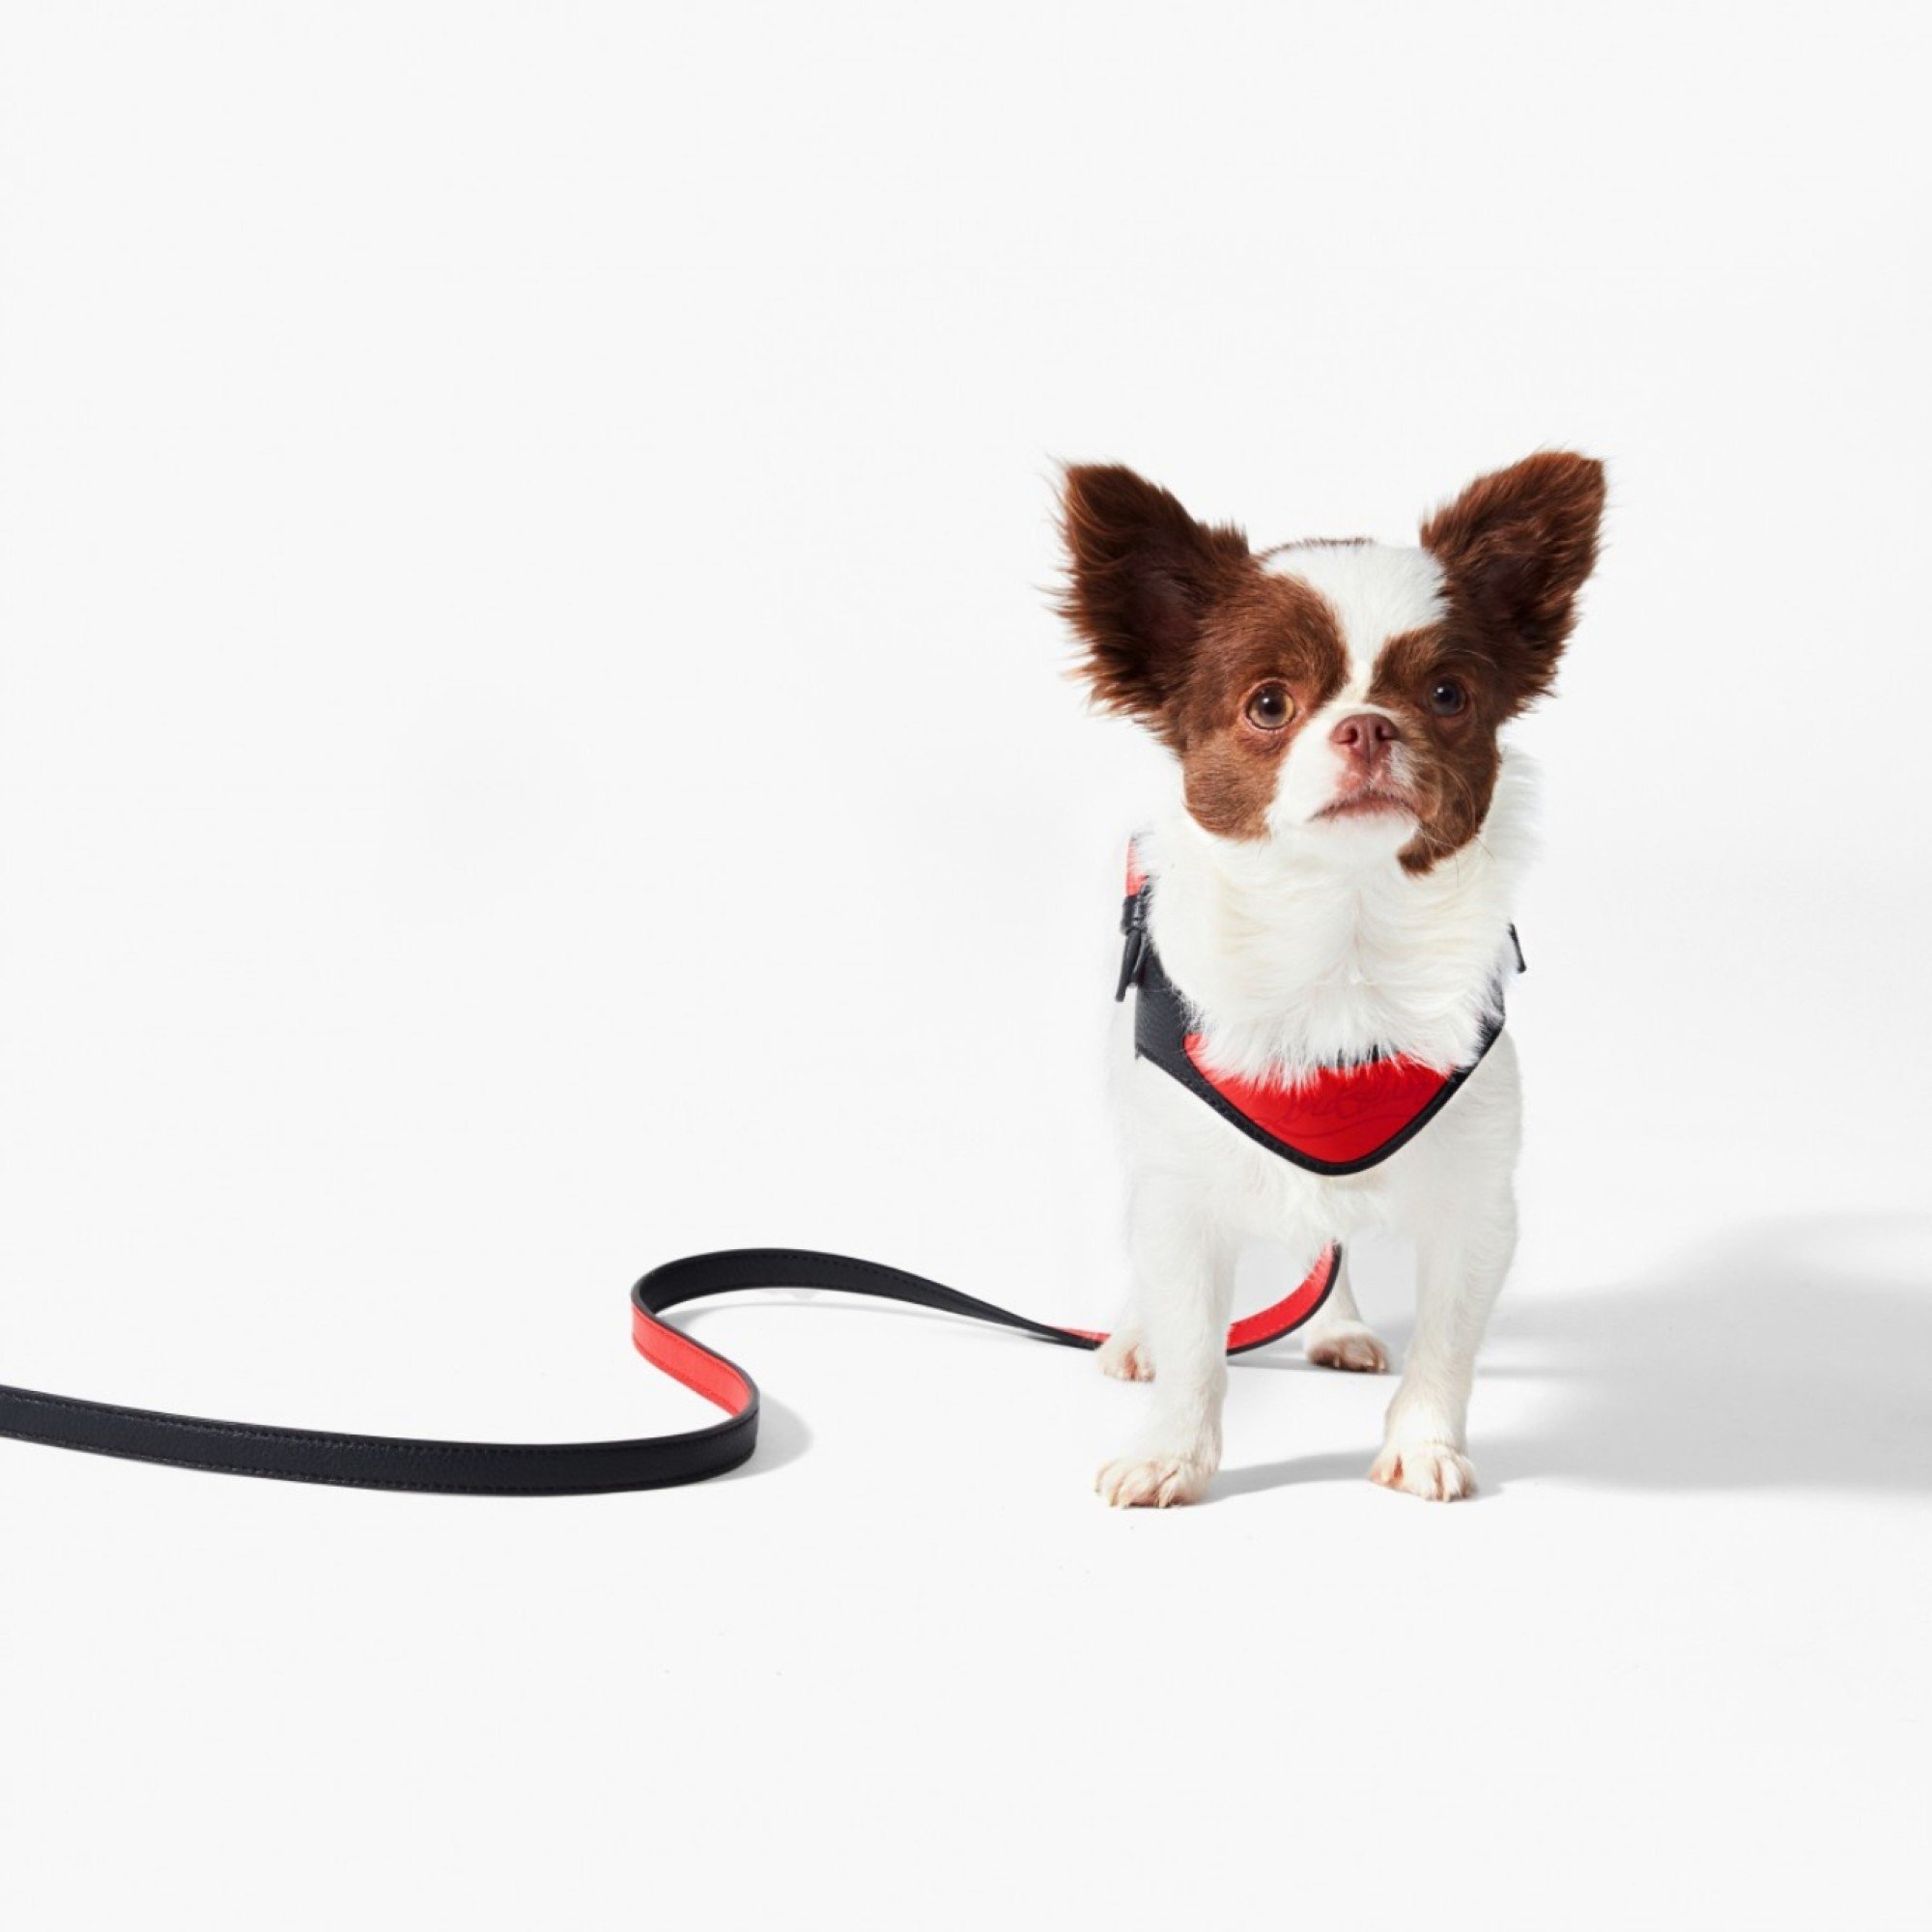 4 luxury brands to twin with your pampered pooch: from Louis Vuitton's chic dog  leash and Gucci's monogrammed pet carrier bags to Prada's posh collar and  Christian Louboutin's stylish harnesses